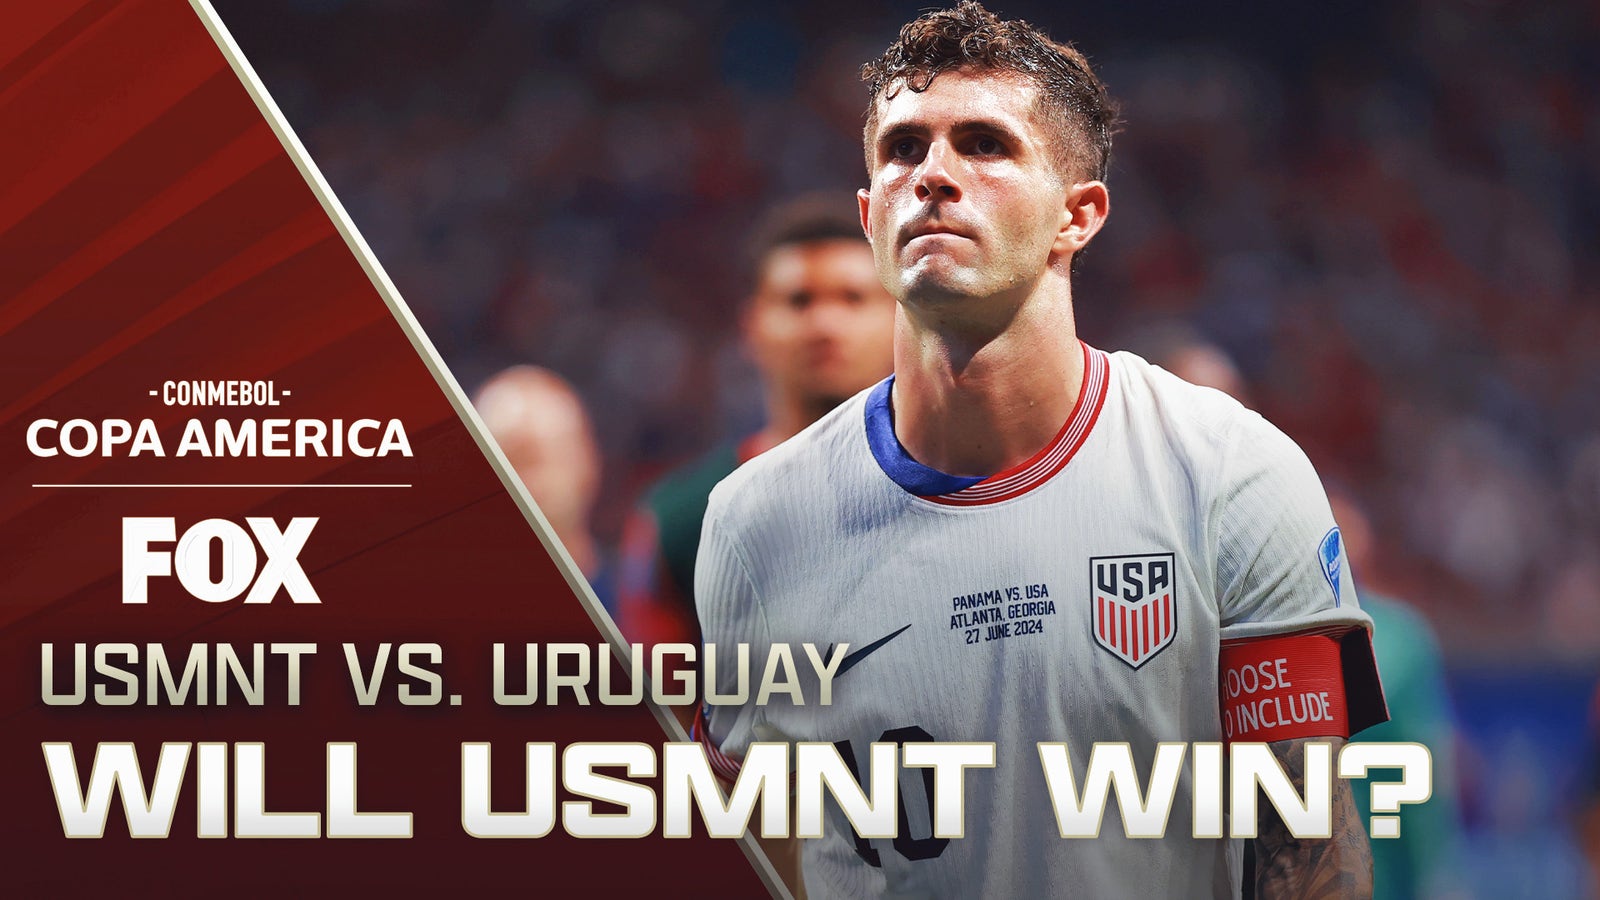 USMNT vs. Uruguay final preview: Can the United States pull out the victory?